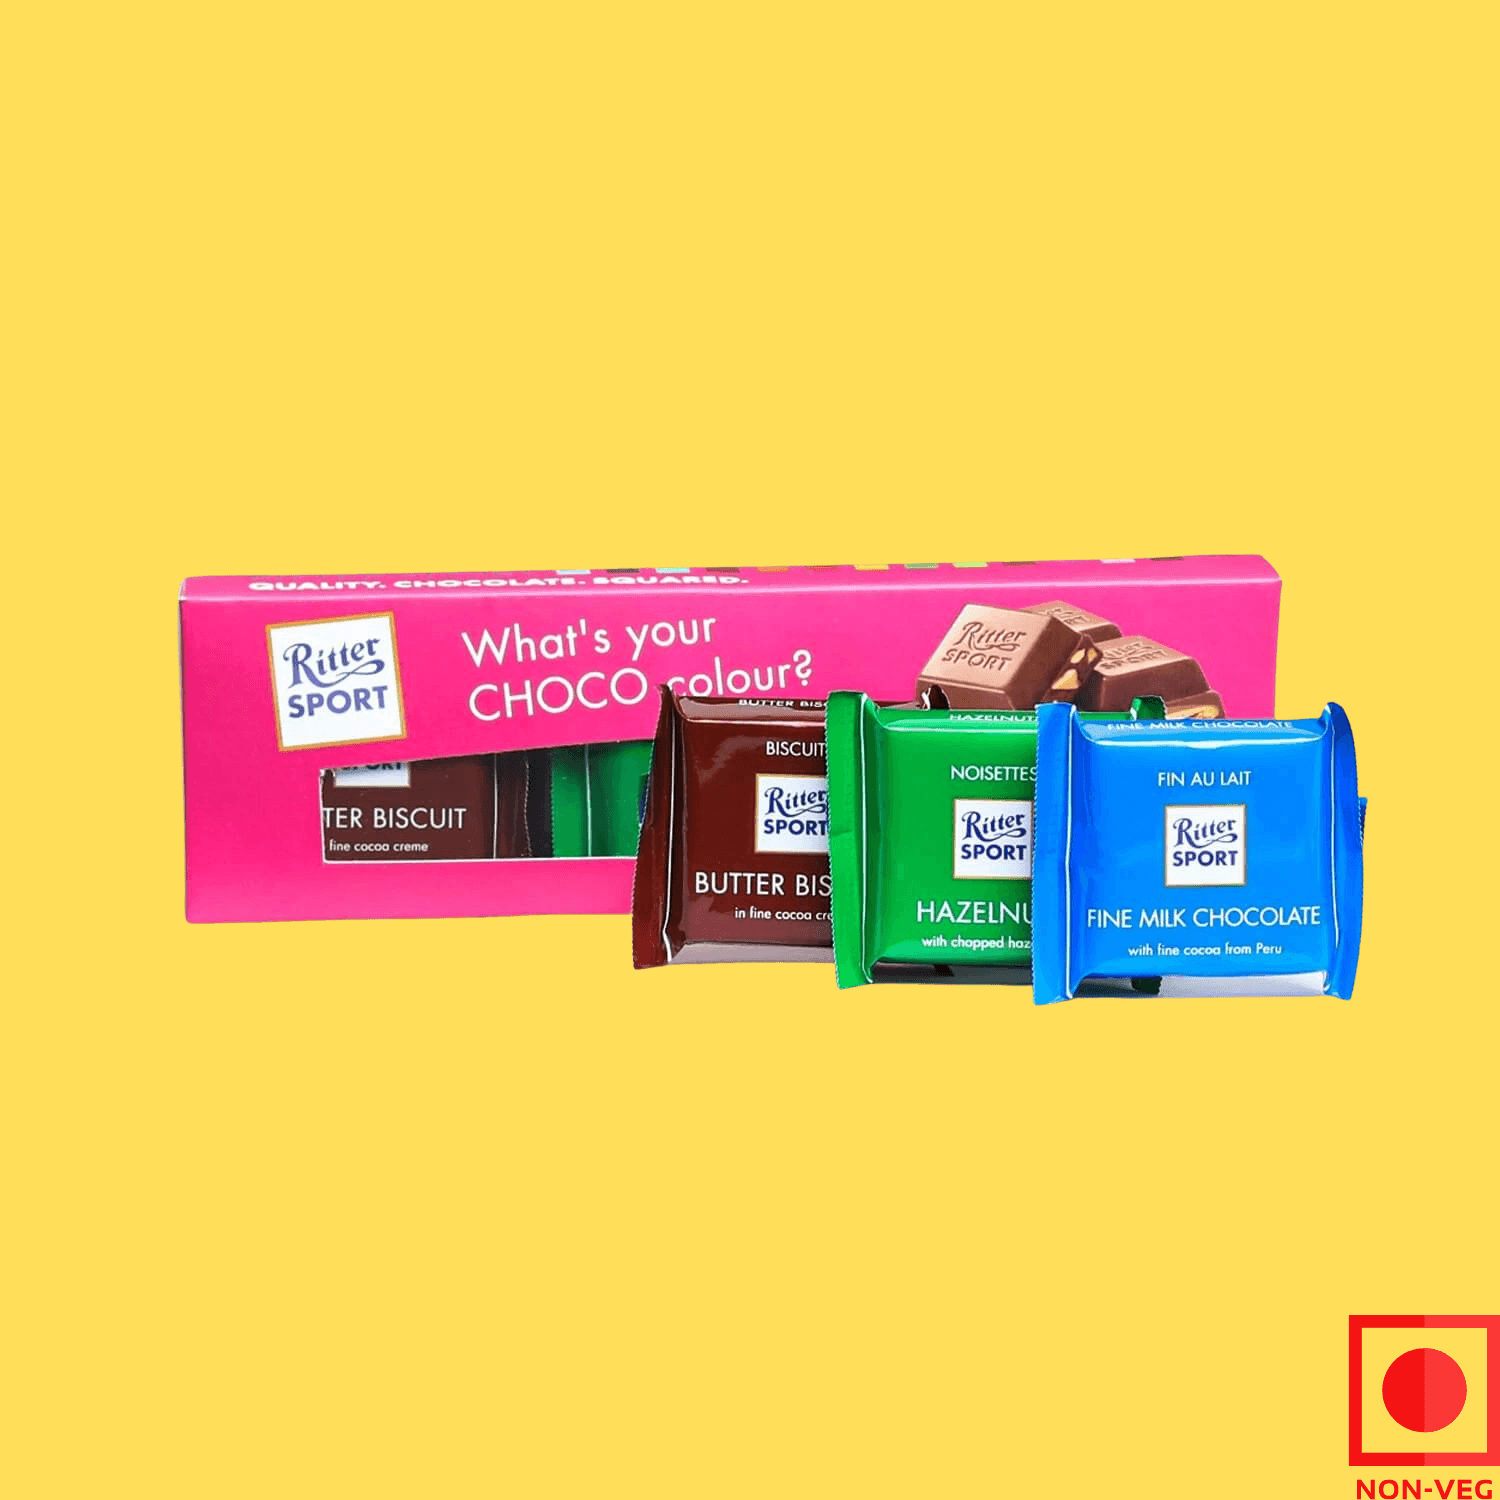 Ritter Sport 3 in 1 Pack-Milk Chocolate,Hazelnut,Butter Biscuit, 50g (Imported) - Super 7 Mart